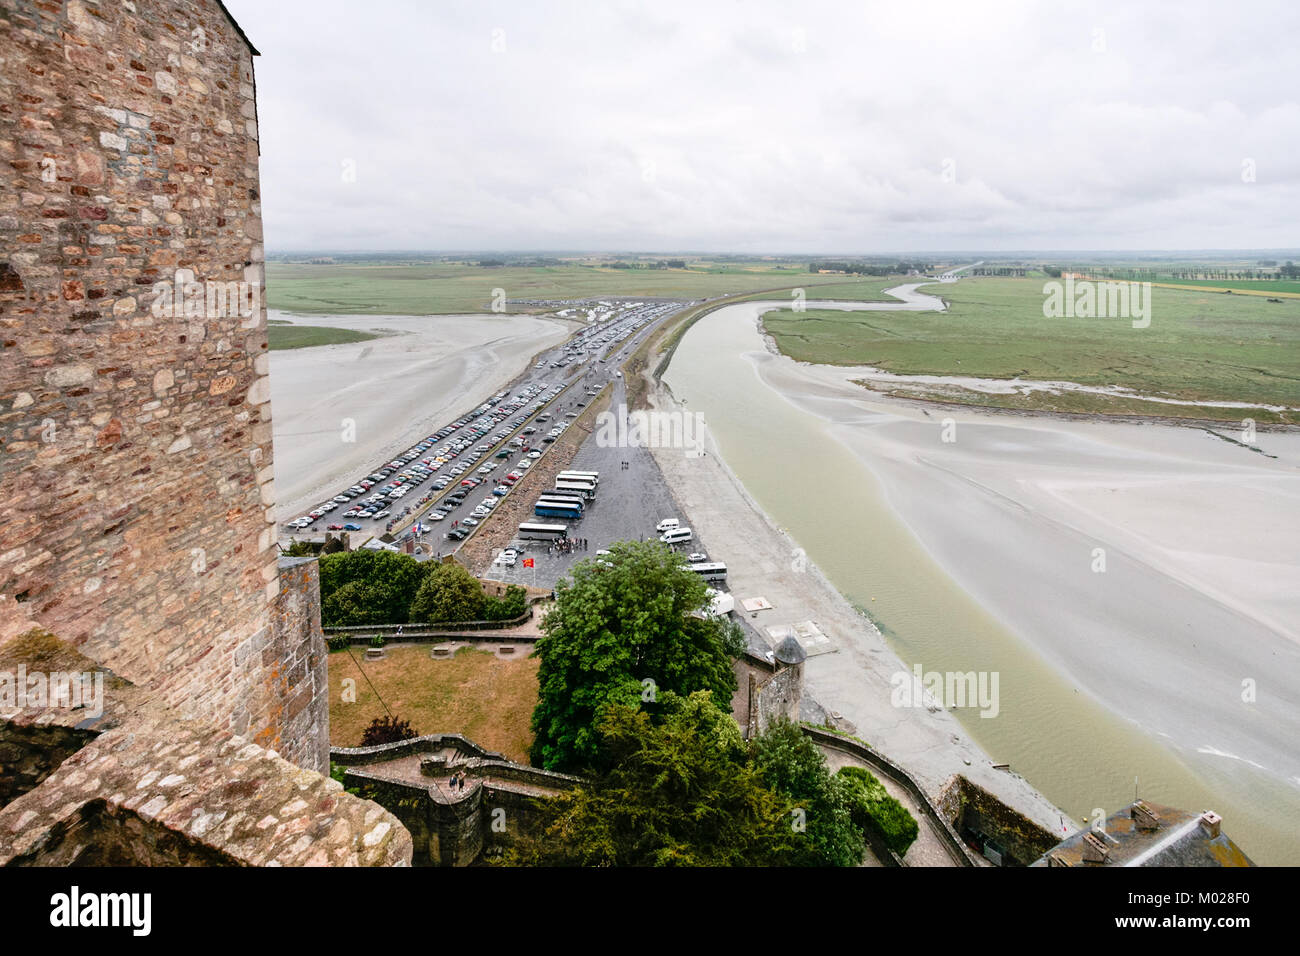 Travel to France - above view of car parking and the causeway to Le Mont Saint-Michel island in Normandy in rain Stock Photo